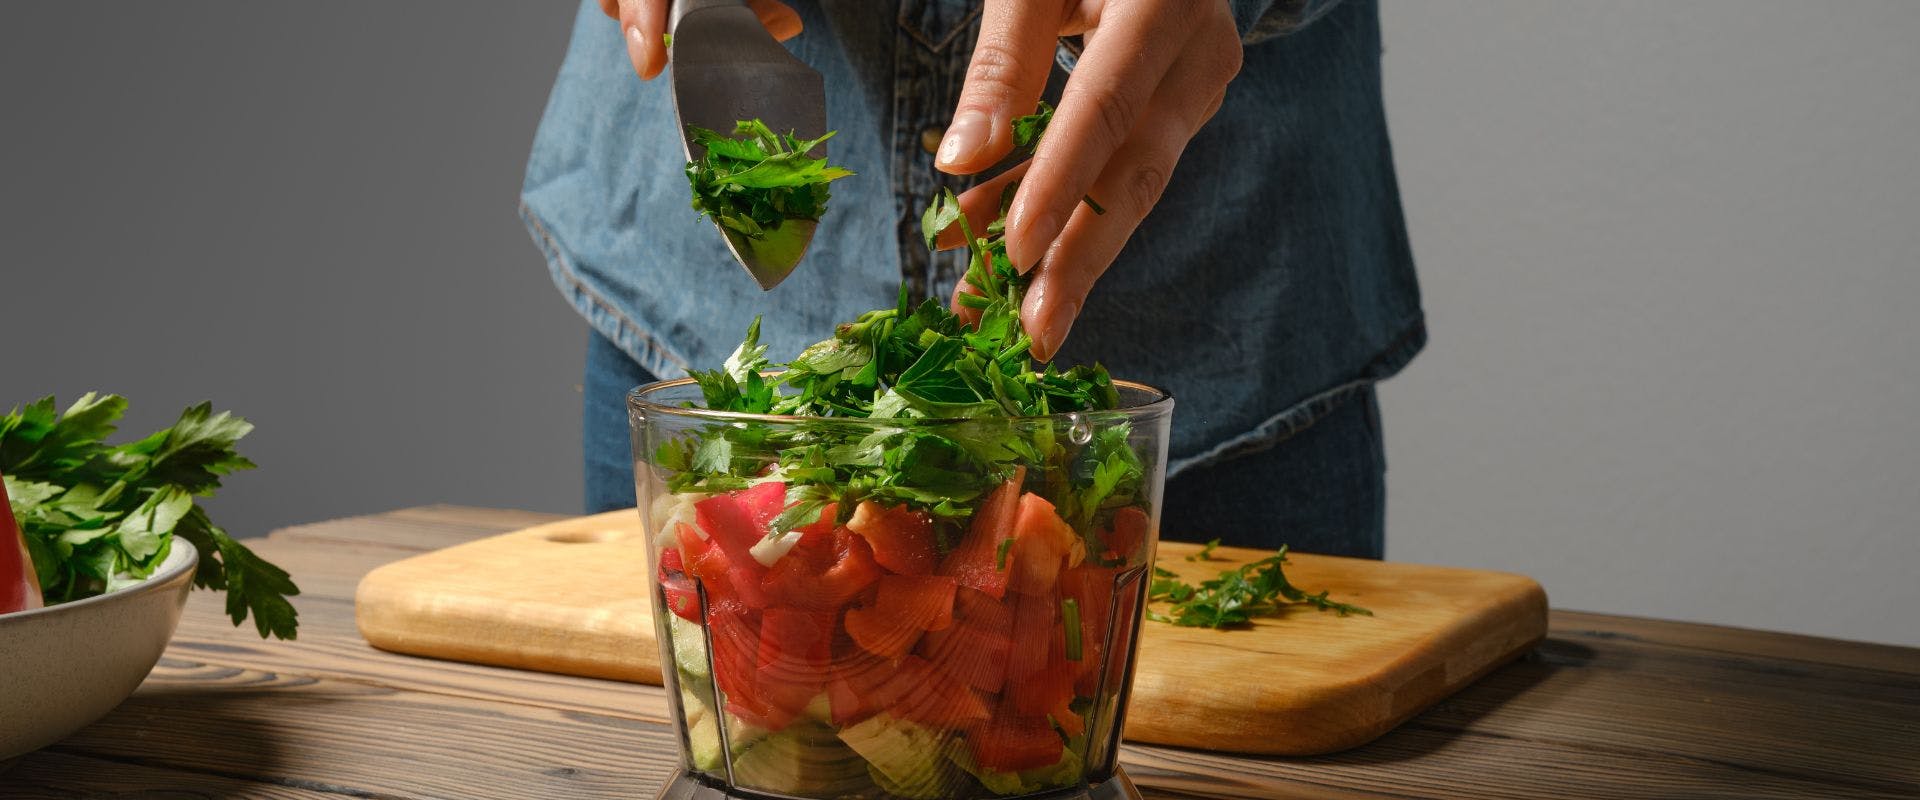 Cilantro being added into a blender with other salsa ingredients